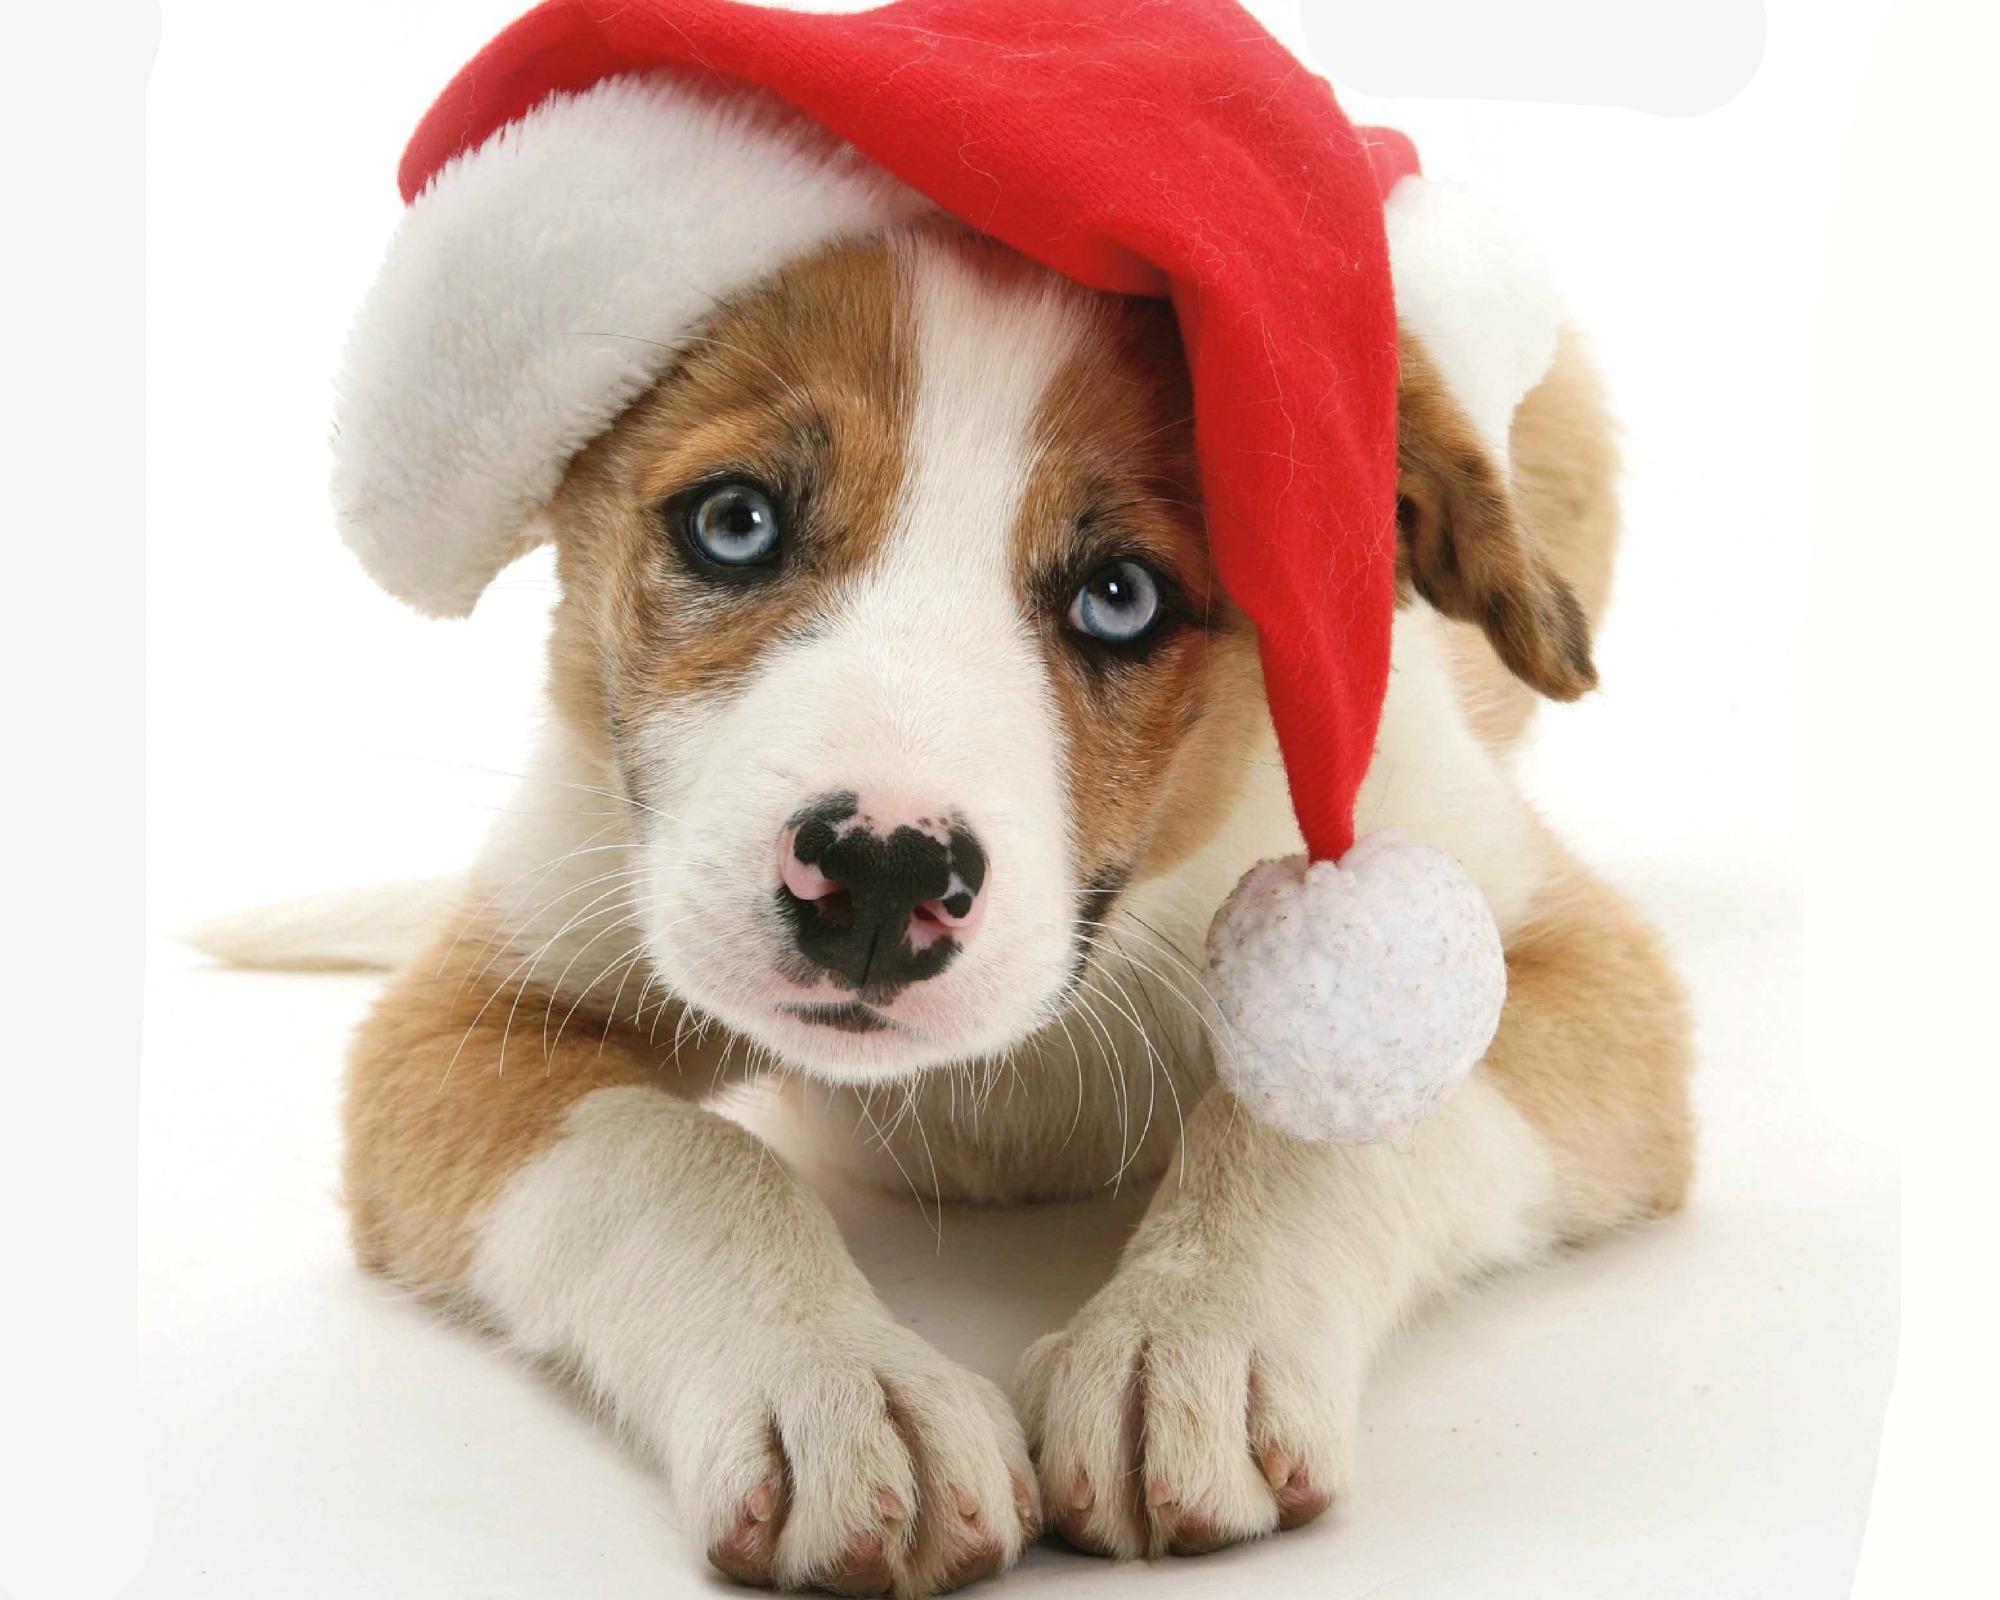 Cute Puppy with Santa Hat HD Wallpaper | Background Image | 2000x1600 | ID:784163 - Wallpaper Abyss